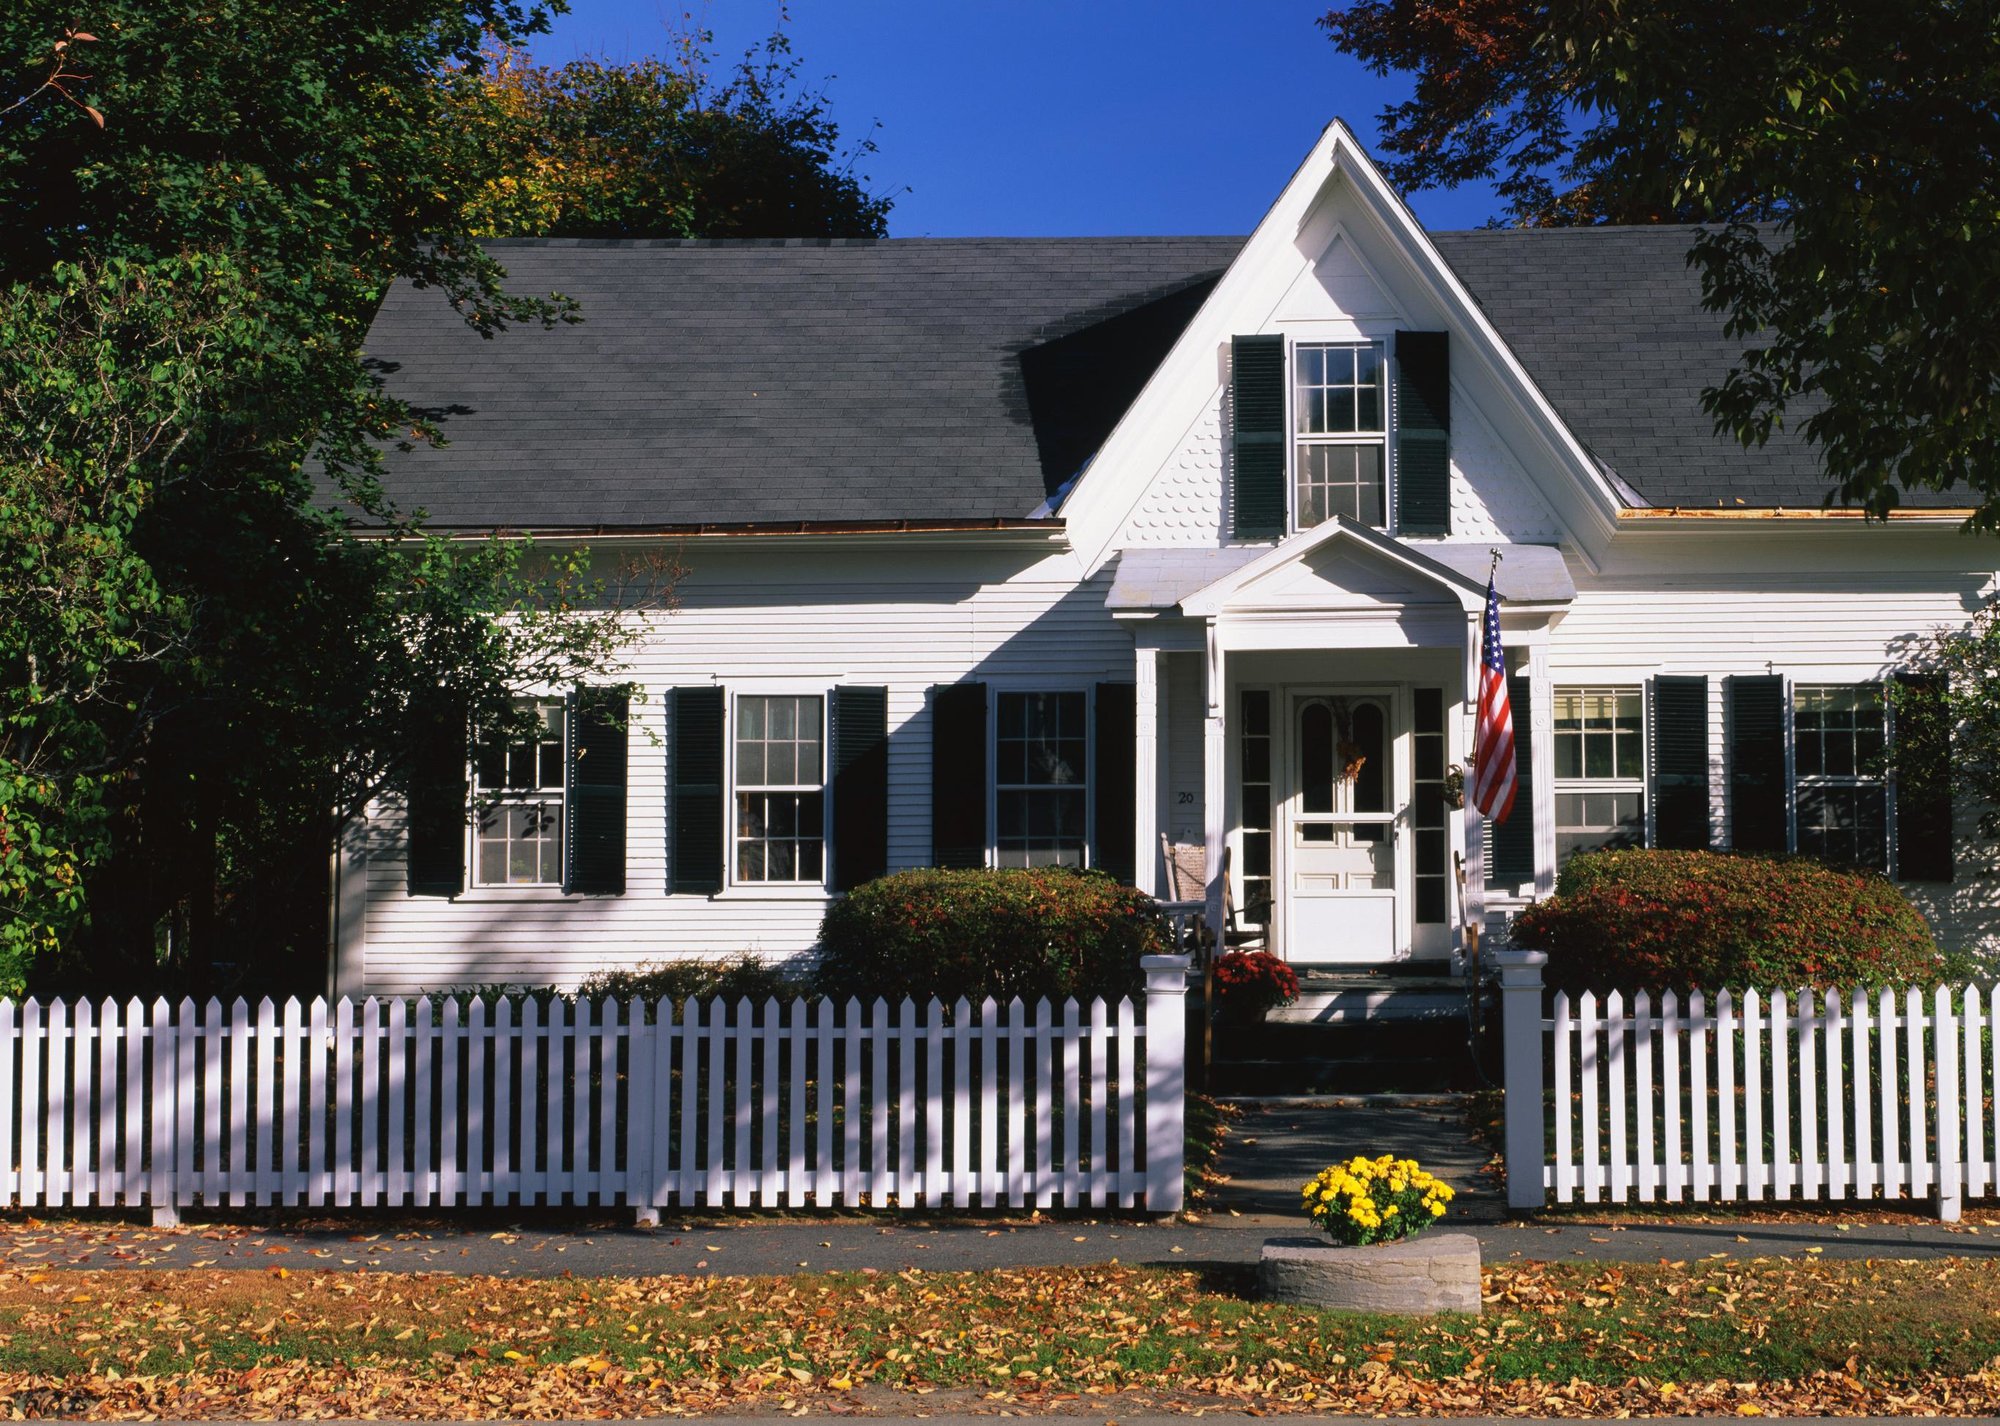 White picket fence in front of white colonial home with American flag